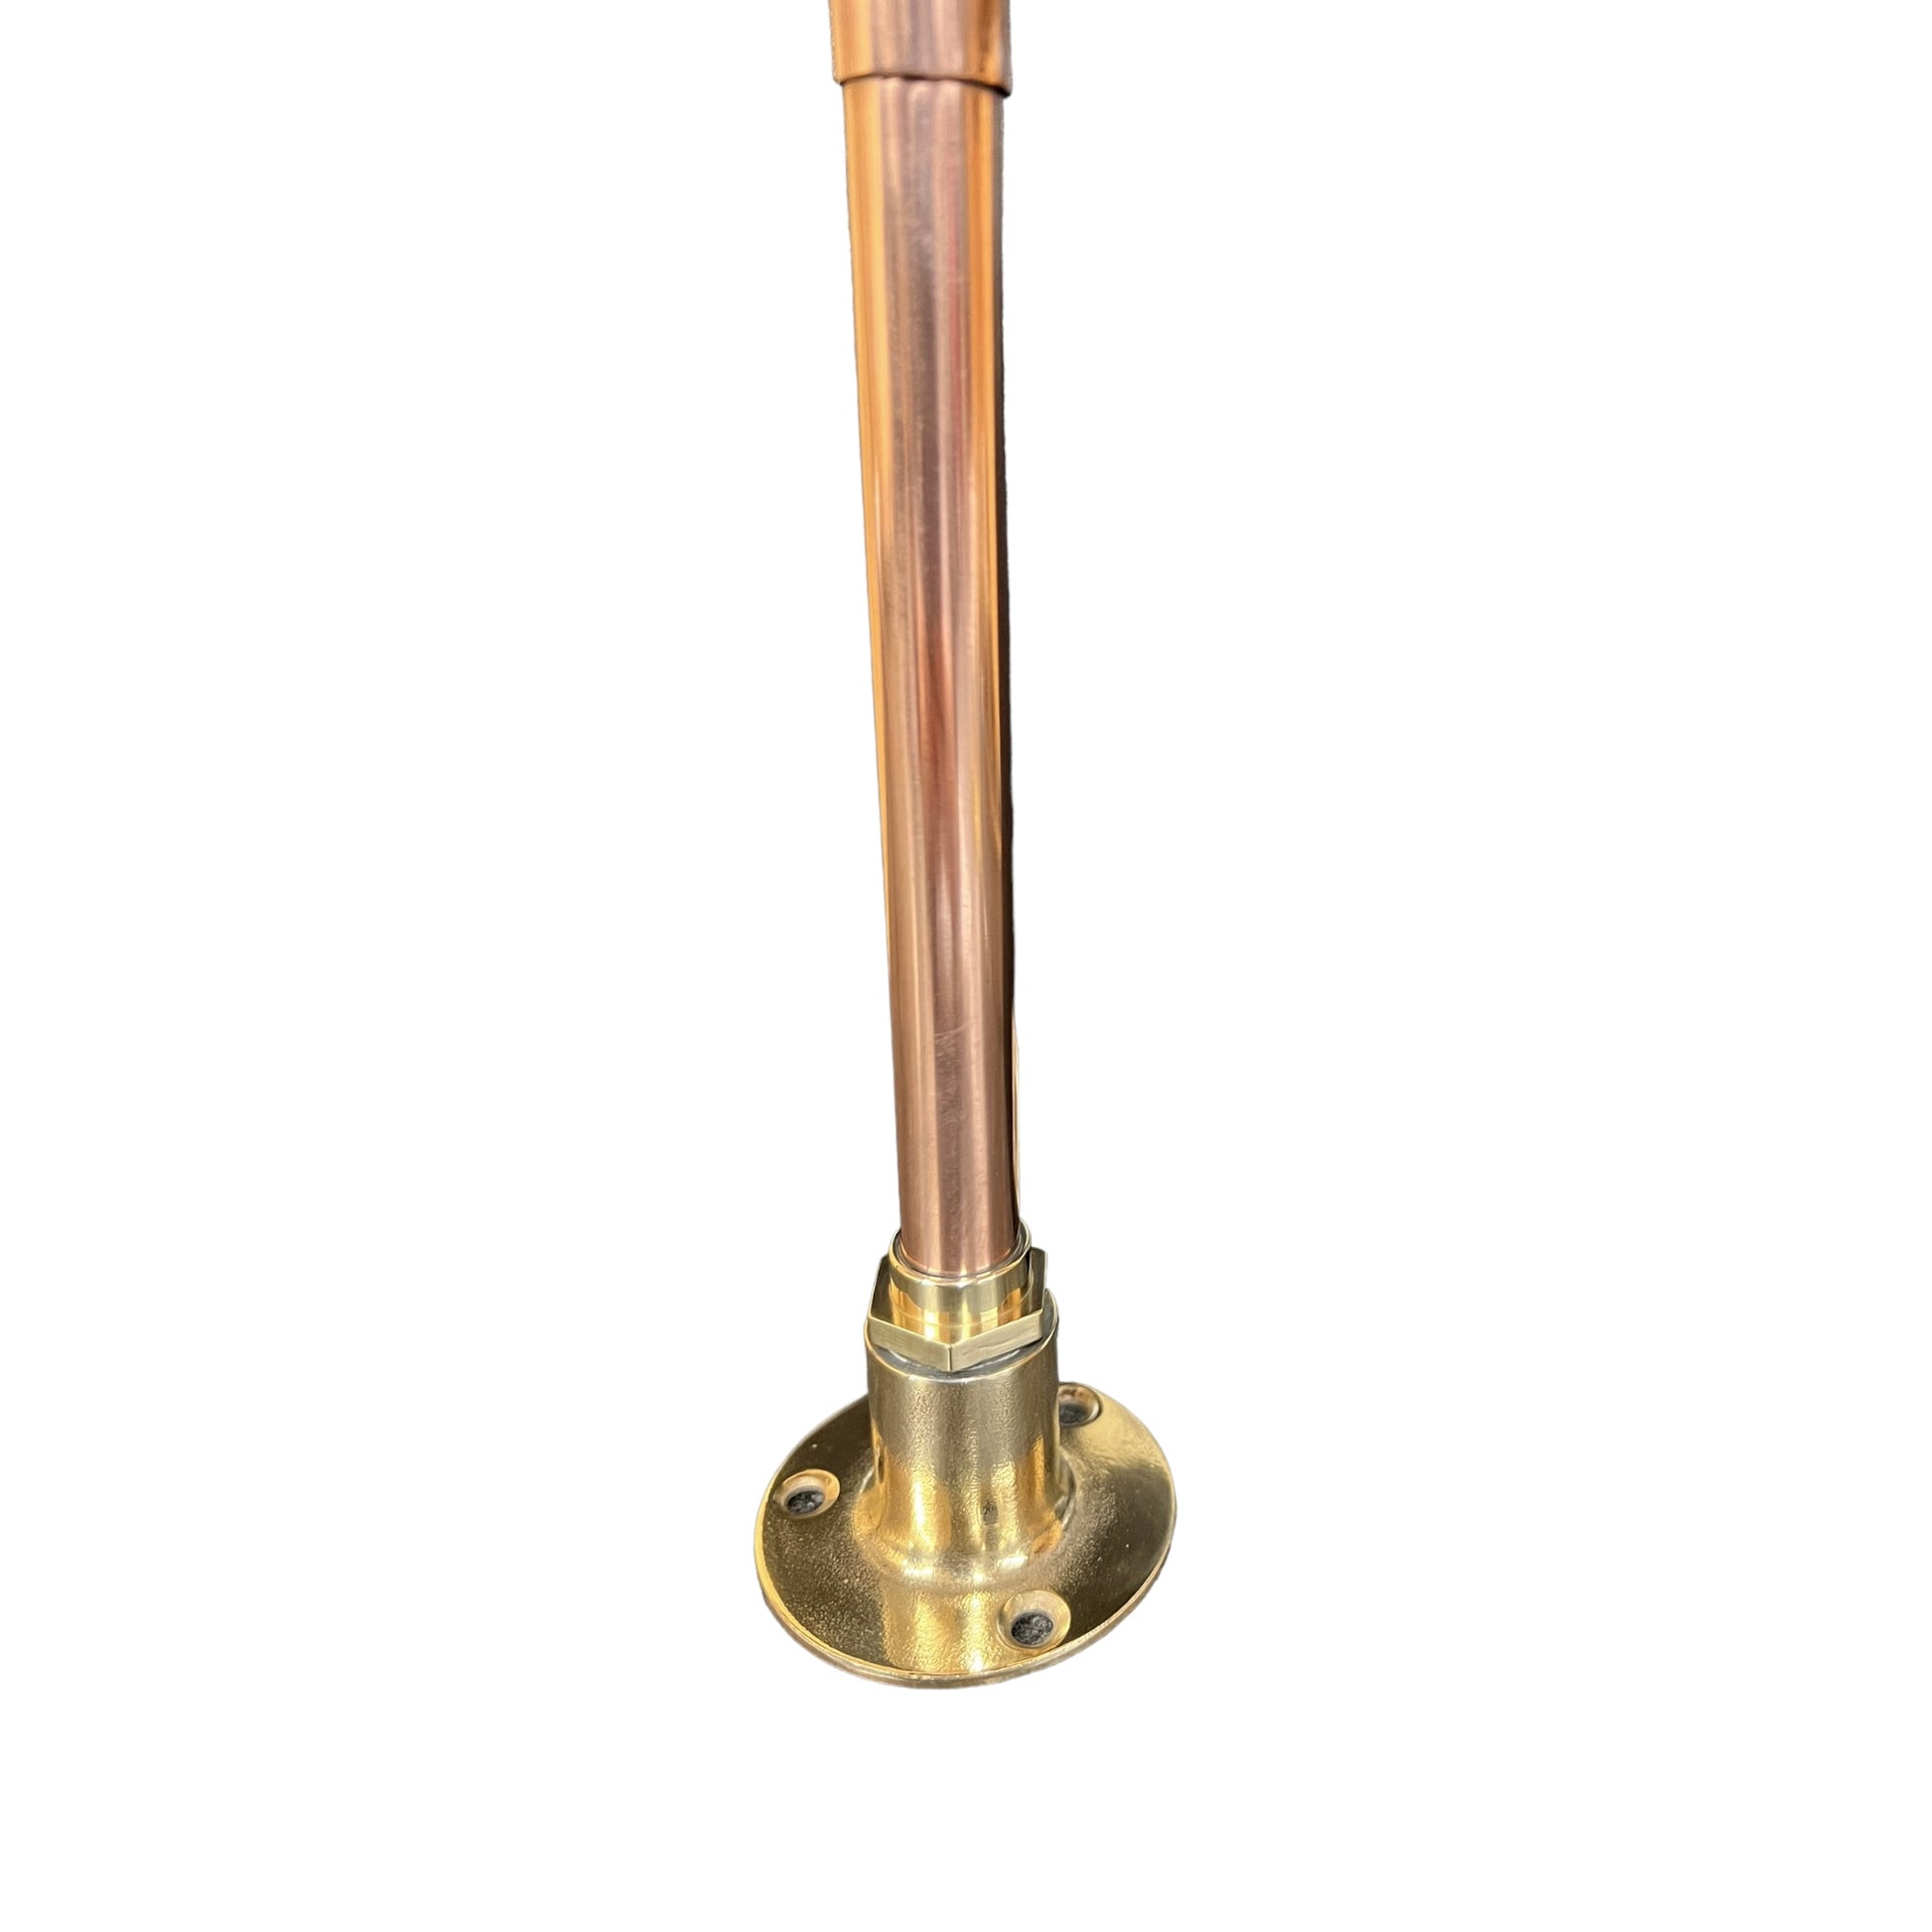 Copper and brass handmade tap with copper upstand sold by All Things French Store